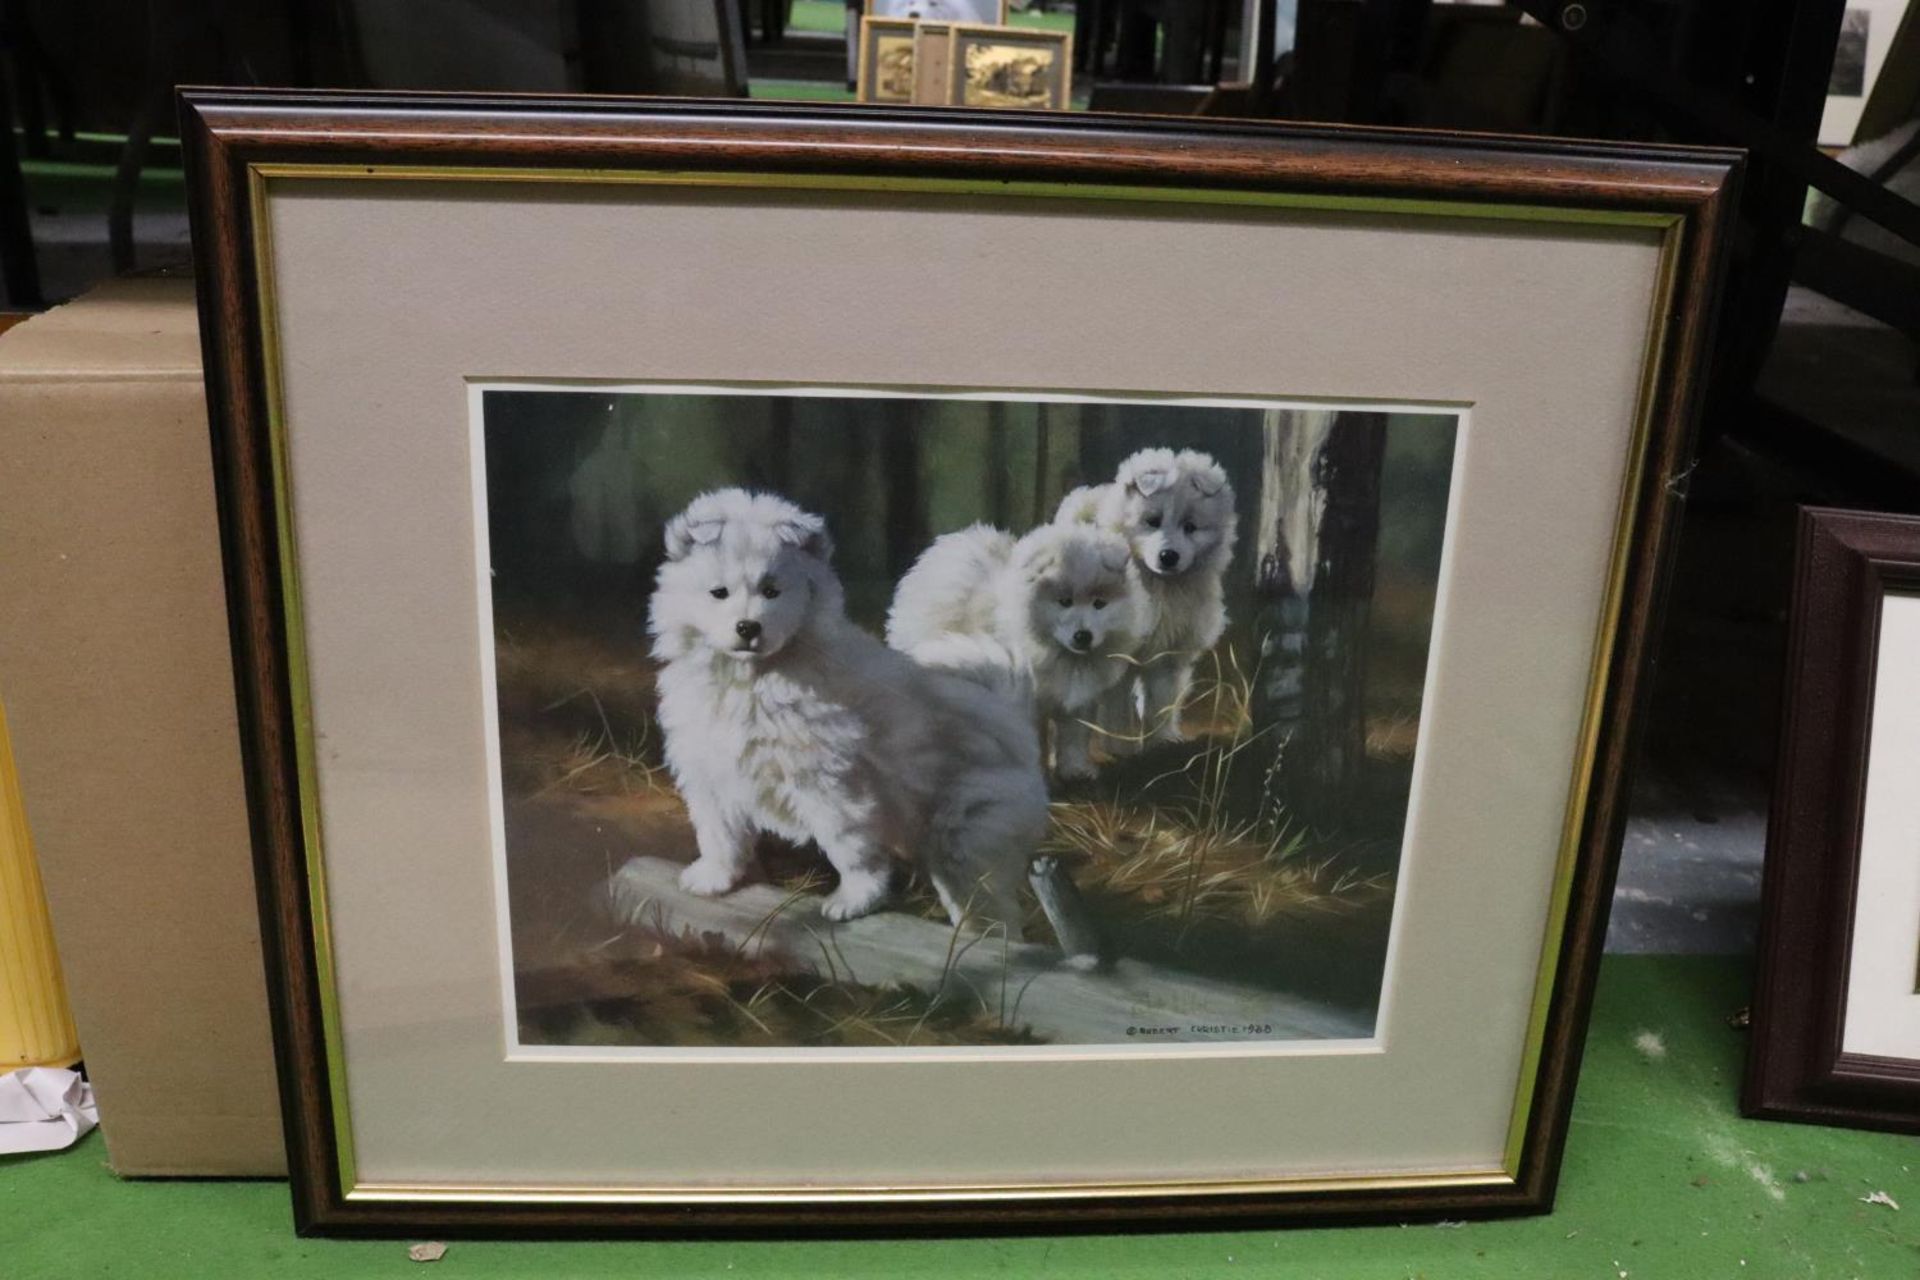 A QUANTITY OF PRINTS AND PHOTOGRAPHS FEATURING WHITE HUSKY DOGS - 6 IN TOTAL - Image 7 of 7